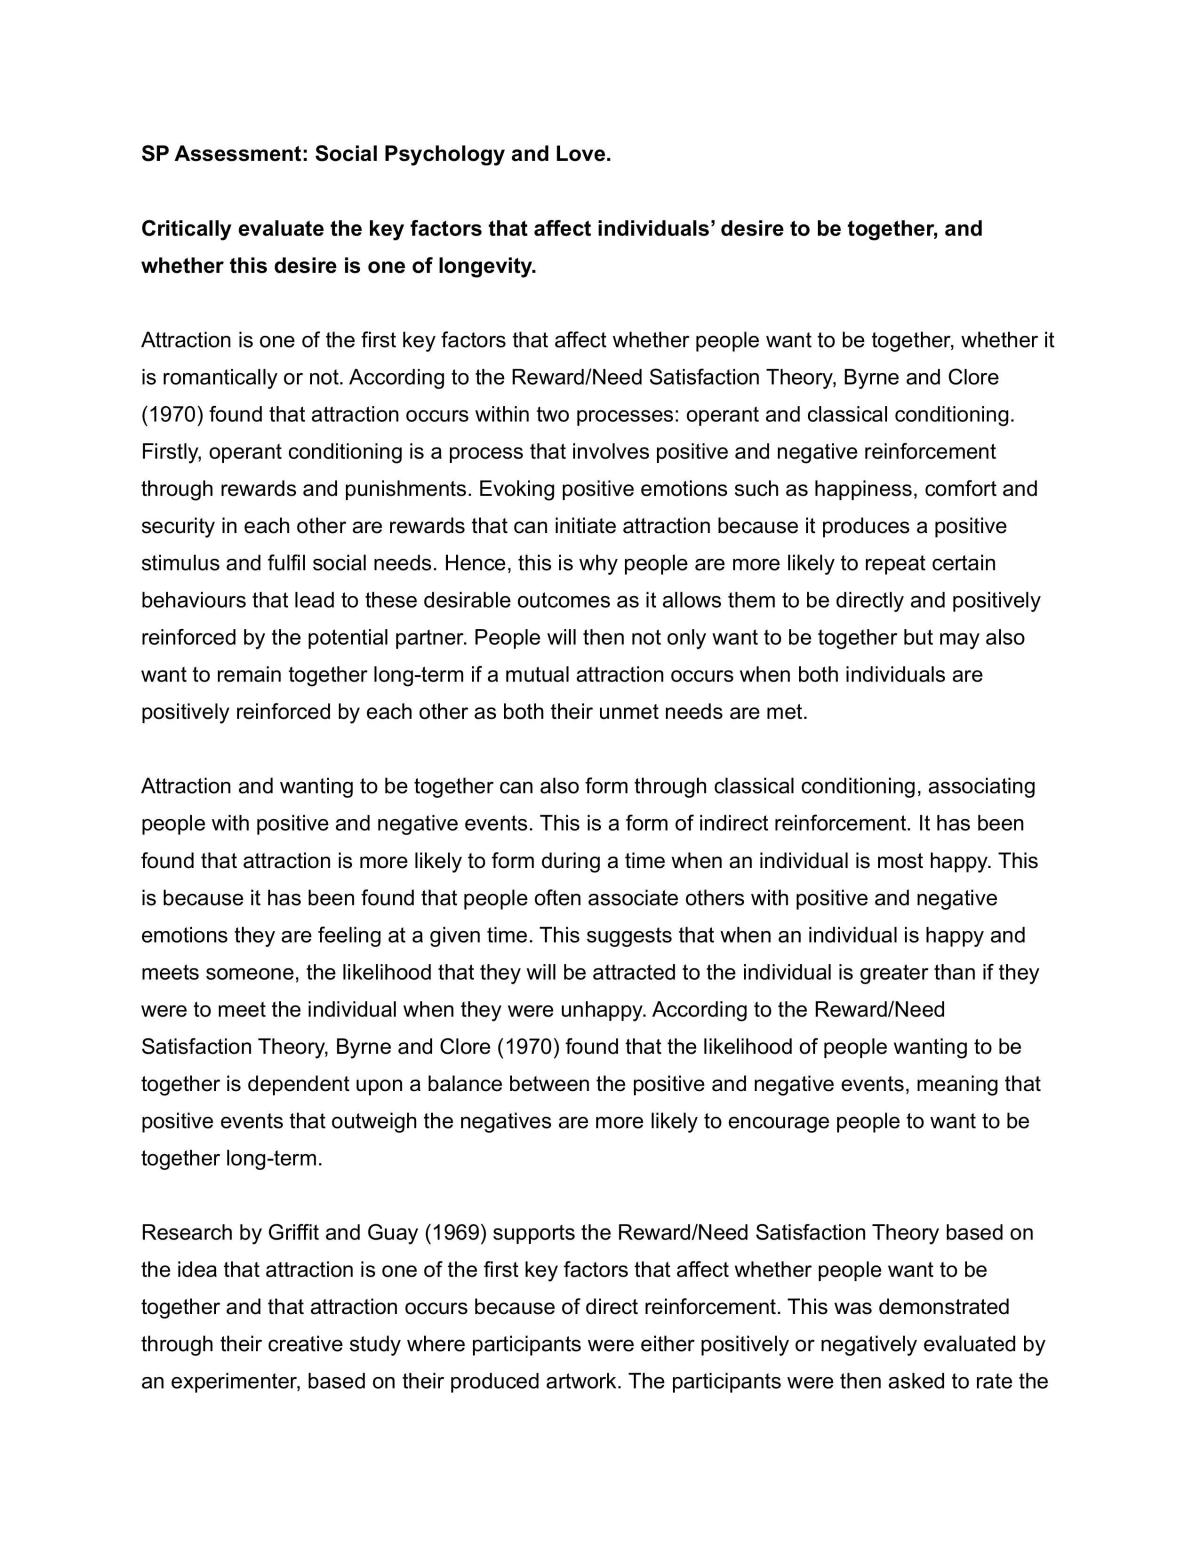 Social Psychology and Love Essay - Page 1